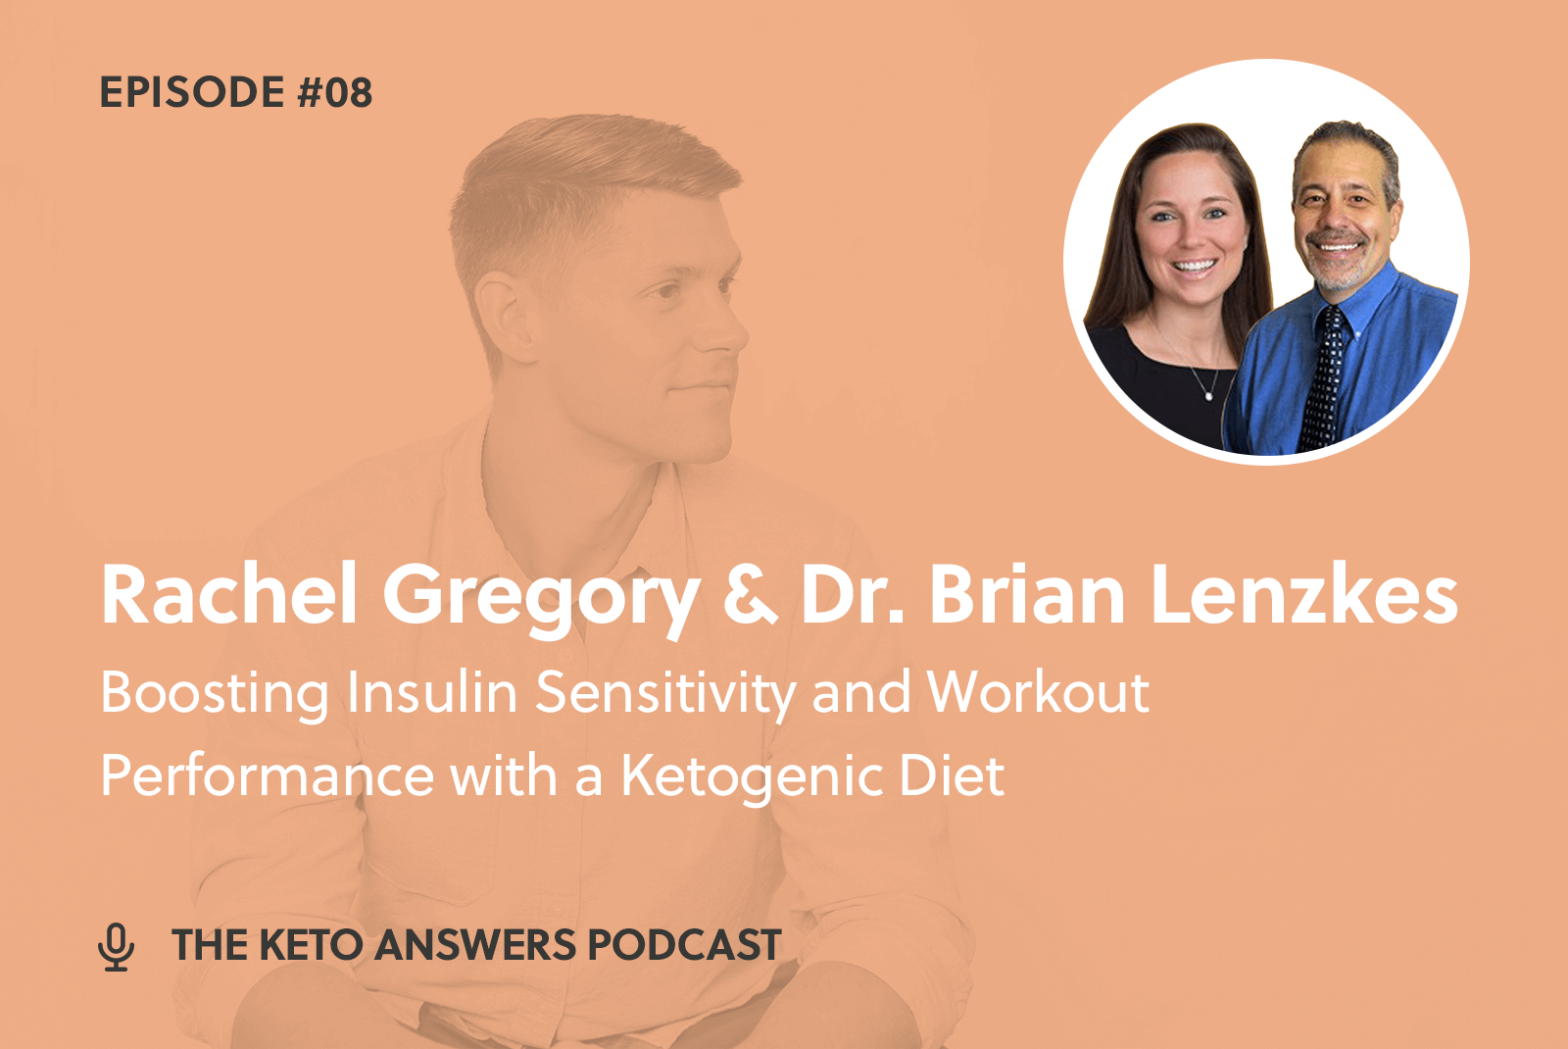 008: Boosting Insulin Sensitivity and Workout Performance with a Ketogenic Diet - Rachel Gregory and Dr. Brian Lenzkes